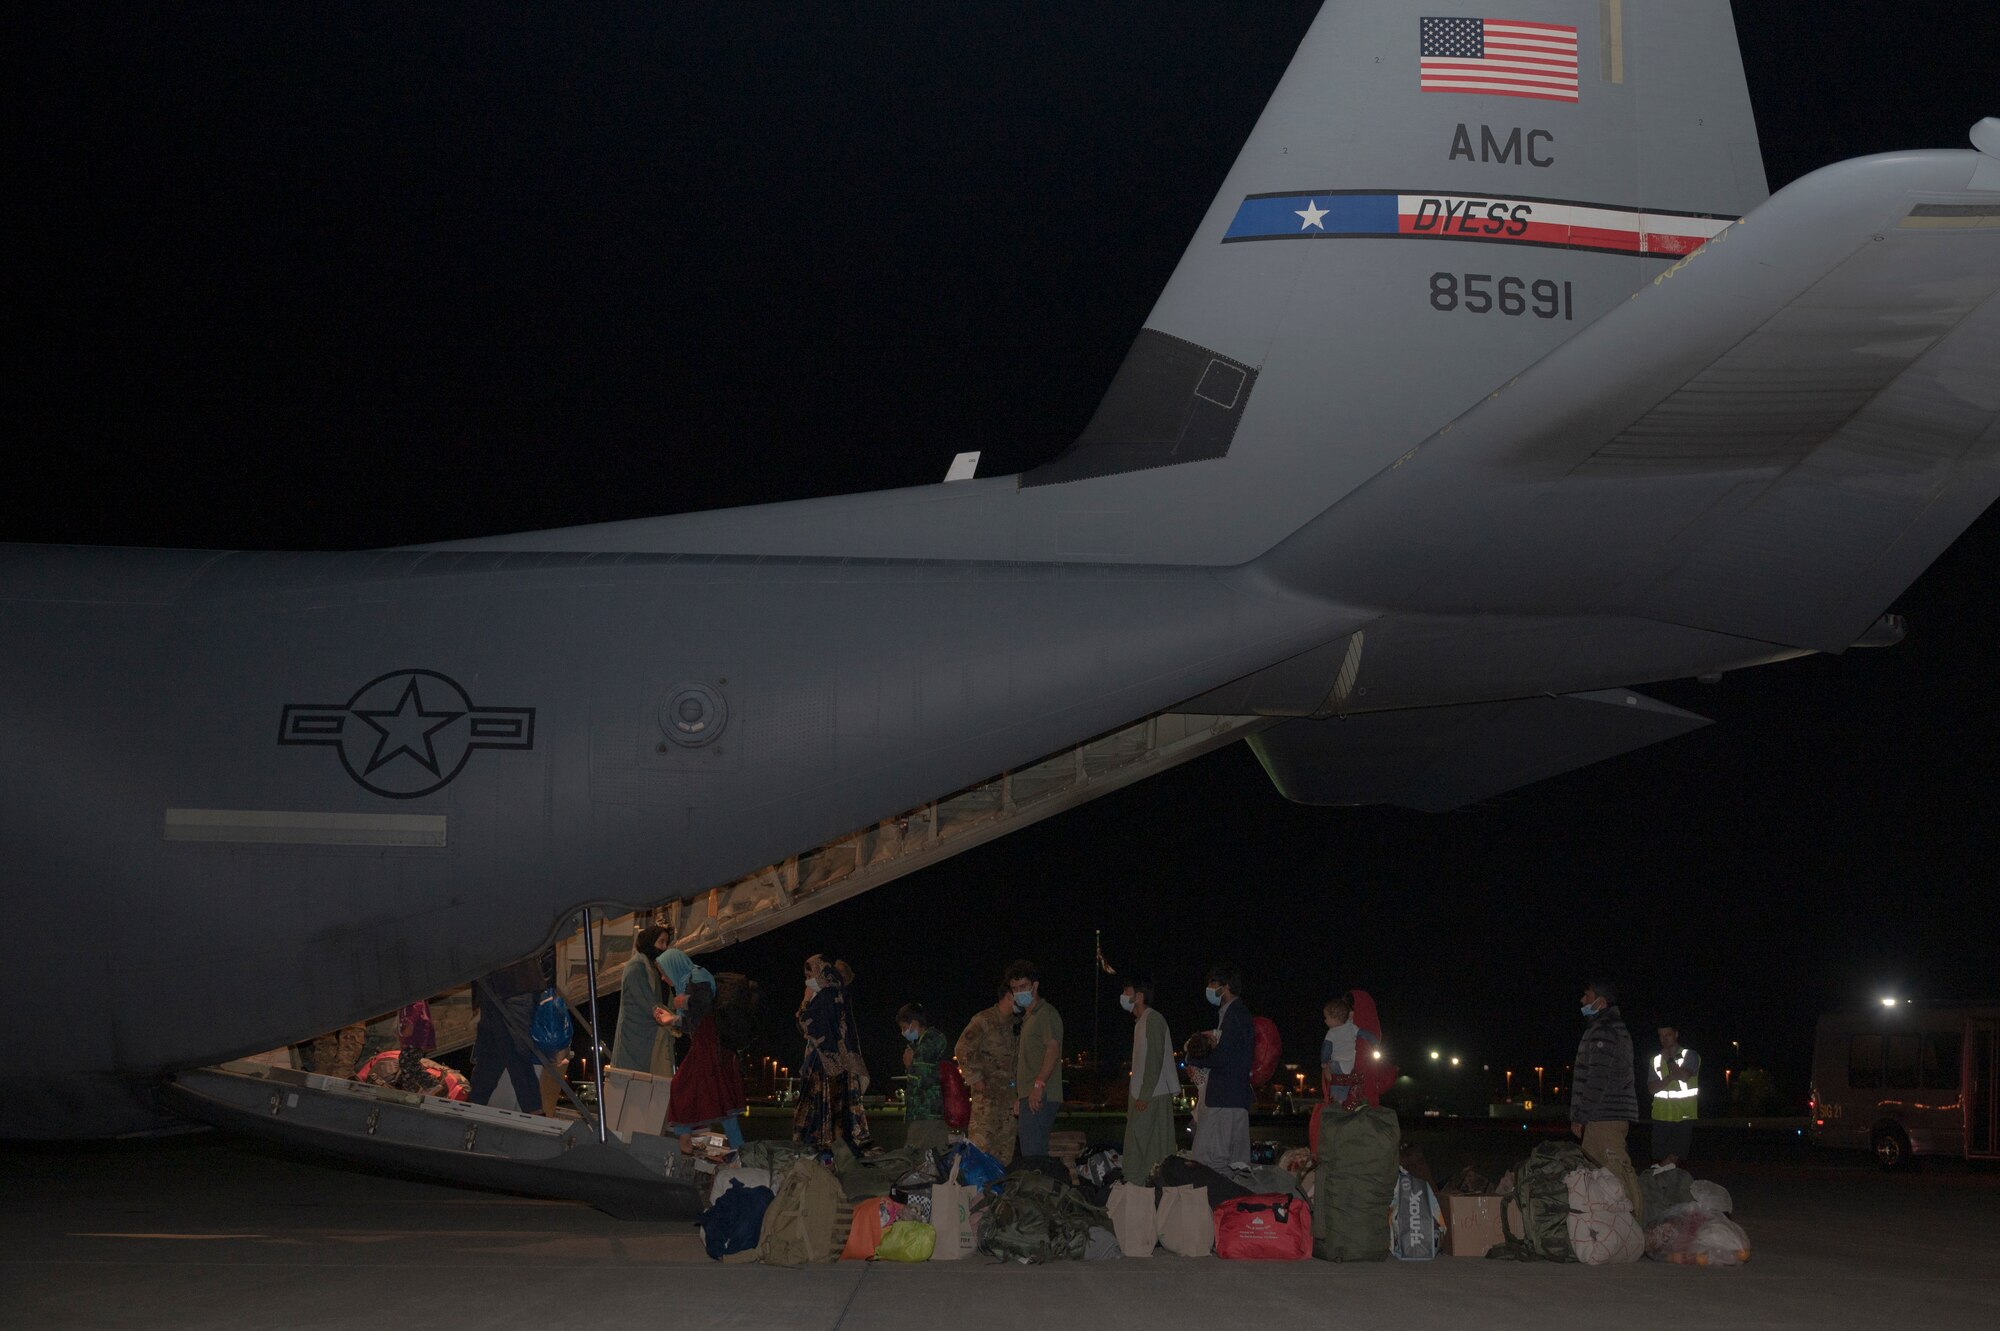 Dyess AFB Supports Operation Allies Welcome in National Effort